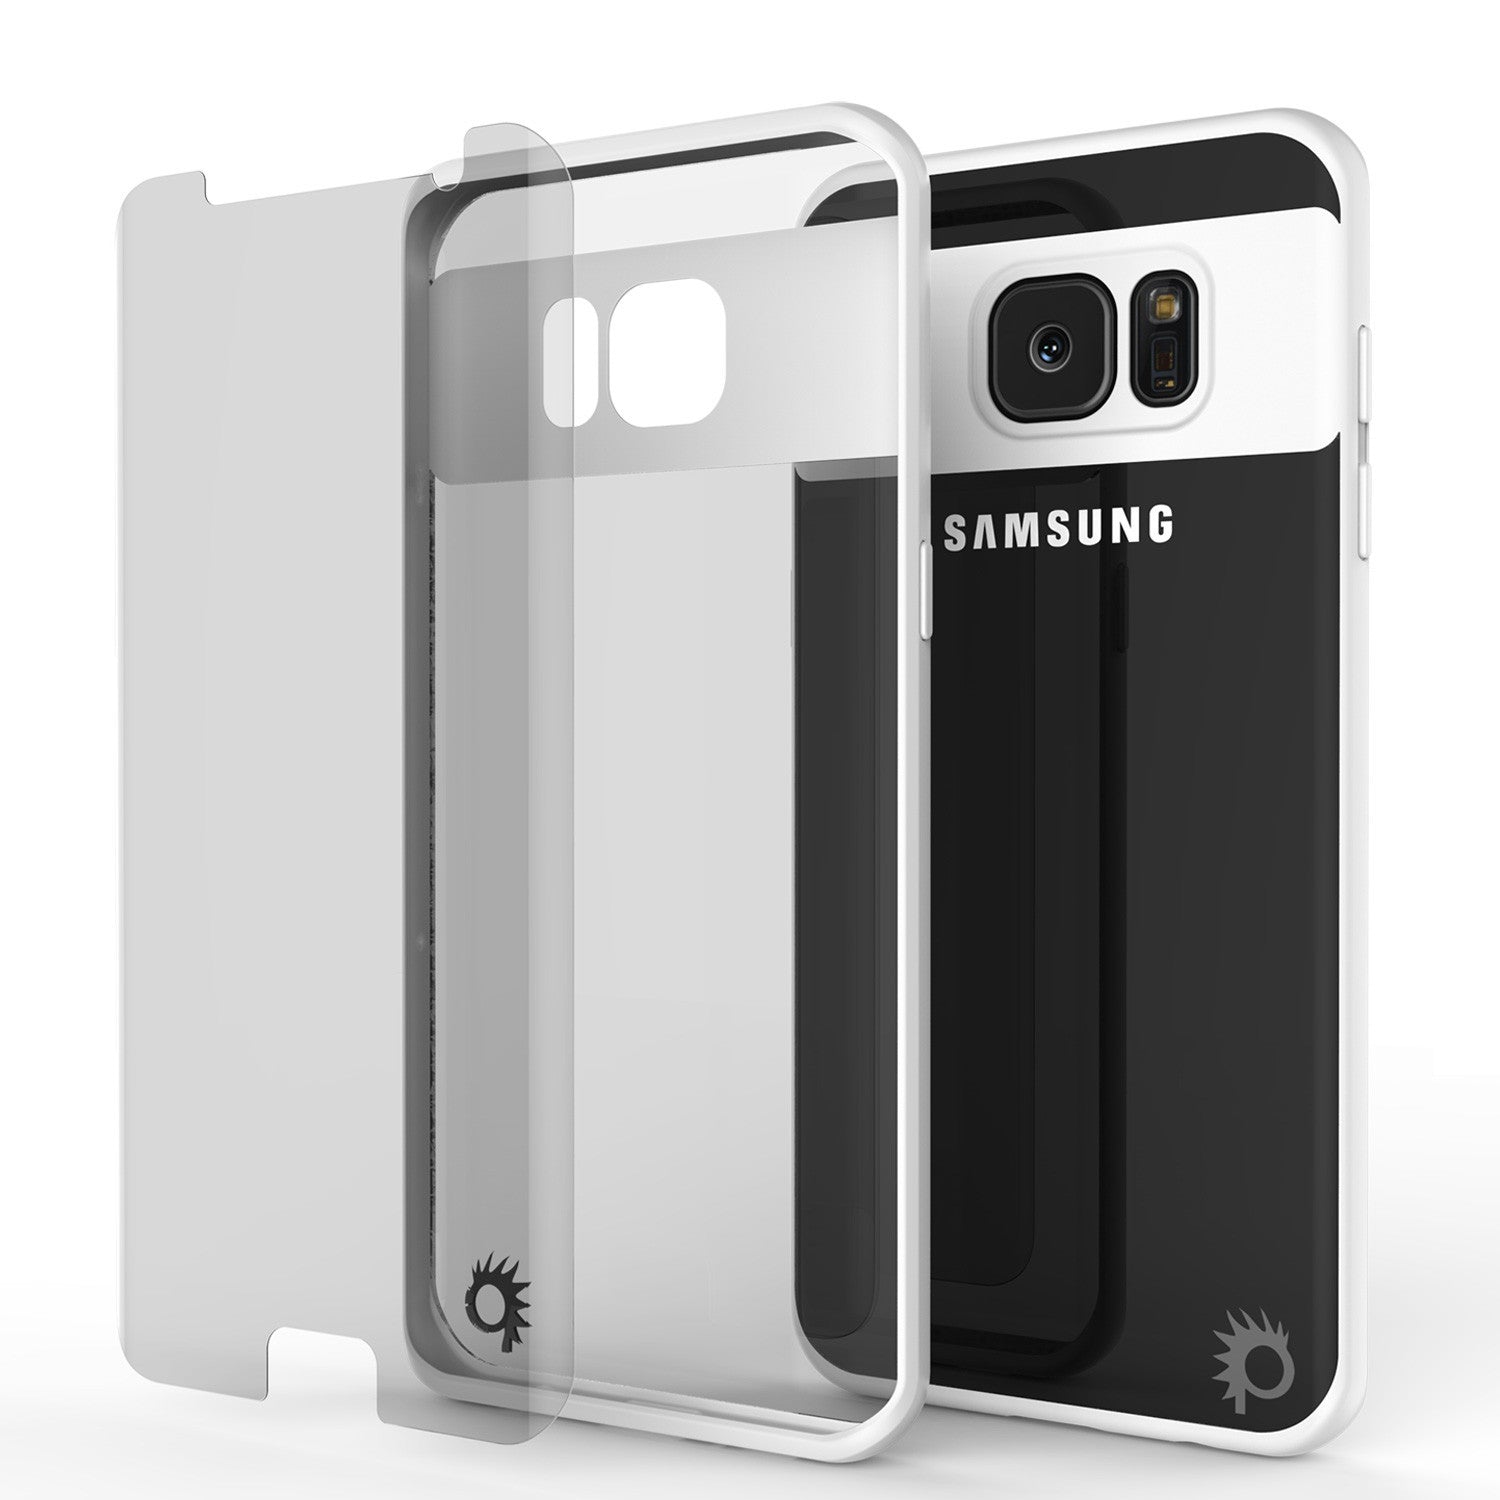 Galaxy S7 Edge Case [Mask Series] [White] Full Body Hybrid Dual Layer Tpu Cover W/ Protective Punkshield Screen Protector